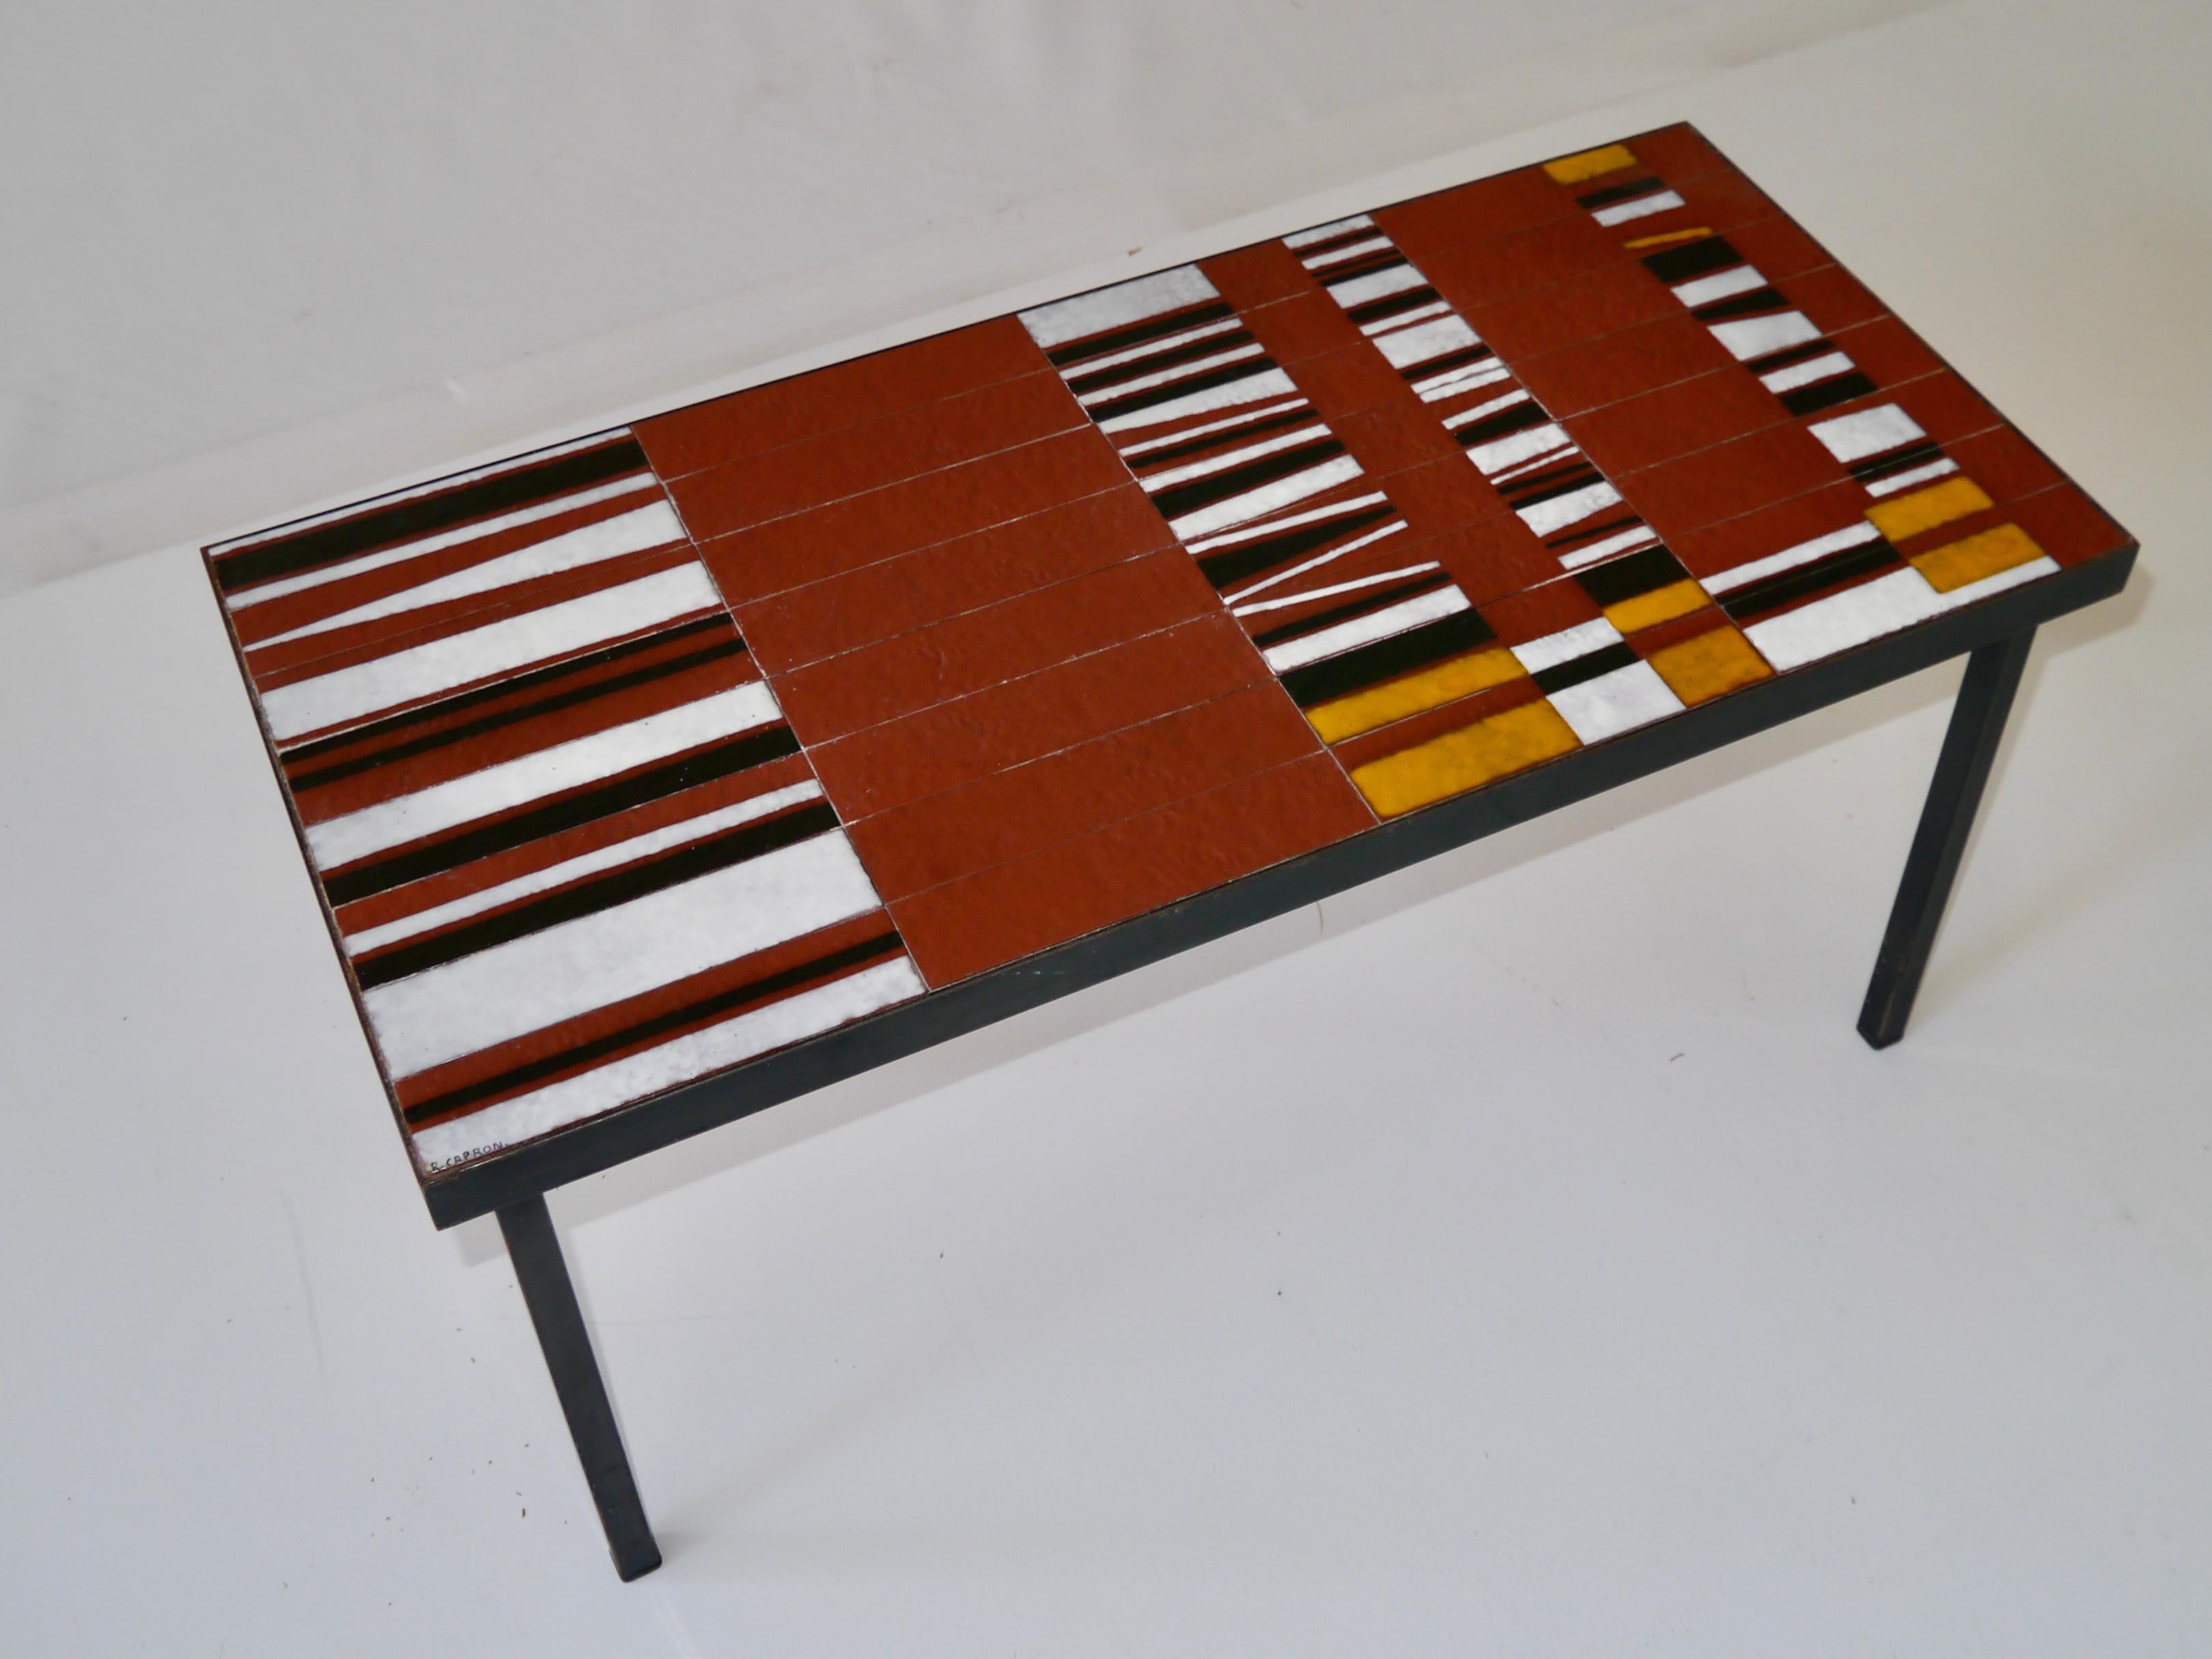 Ceramic Low Table, Roger Capron, Vallauris c. 1960 In Fair Condition For Sale In St Ouen, FR